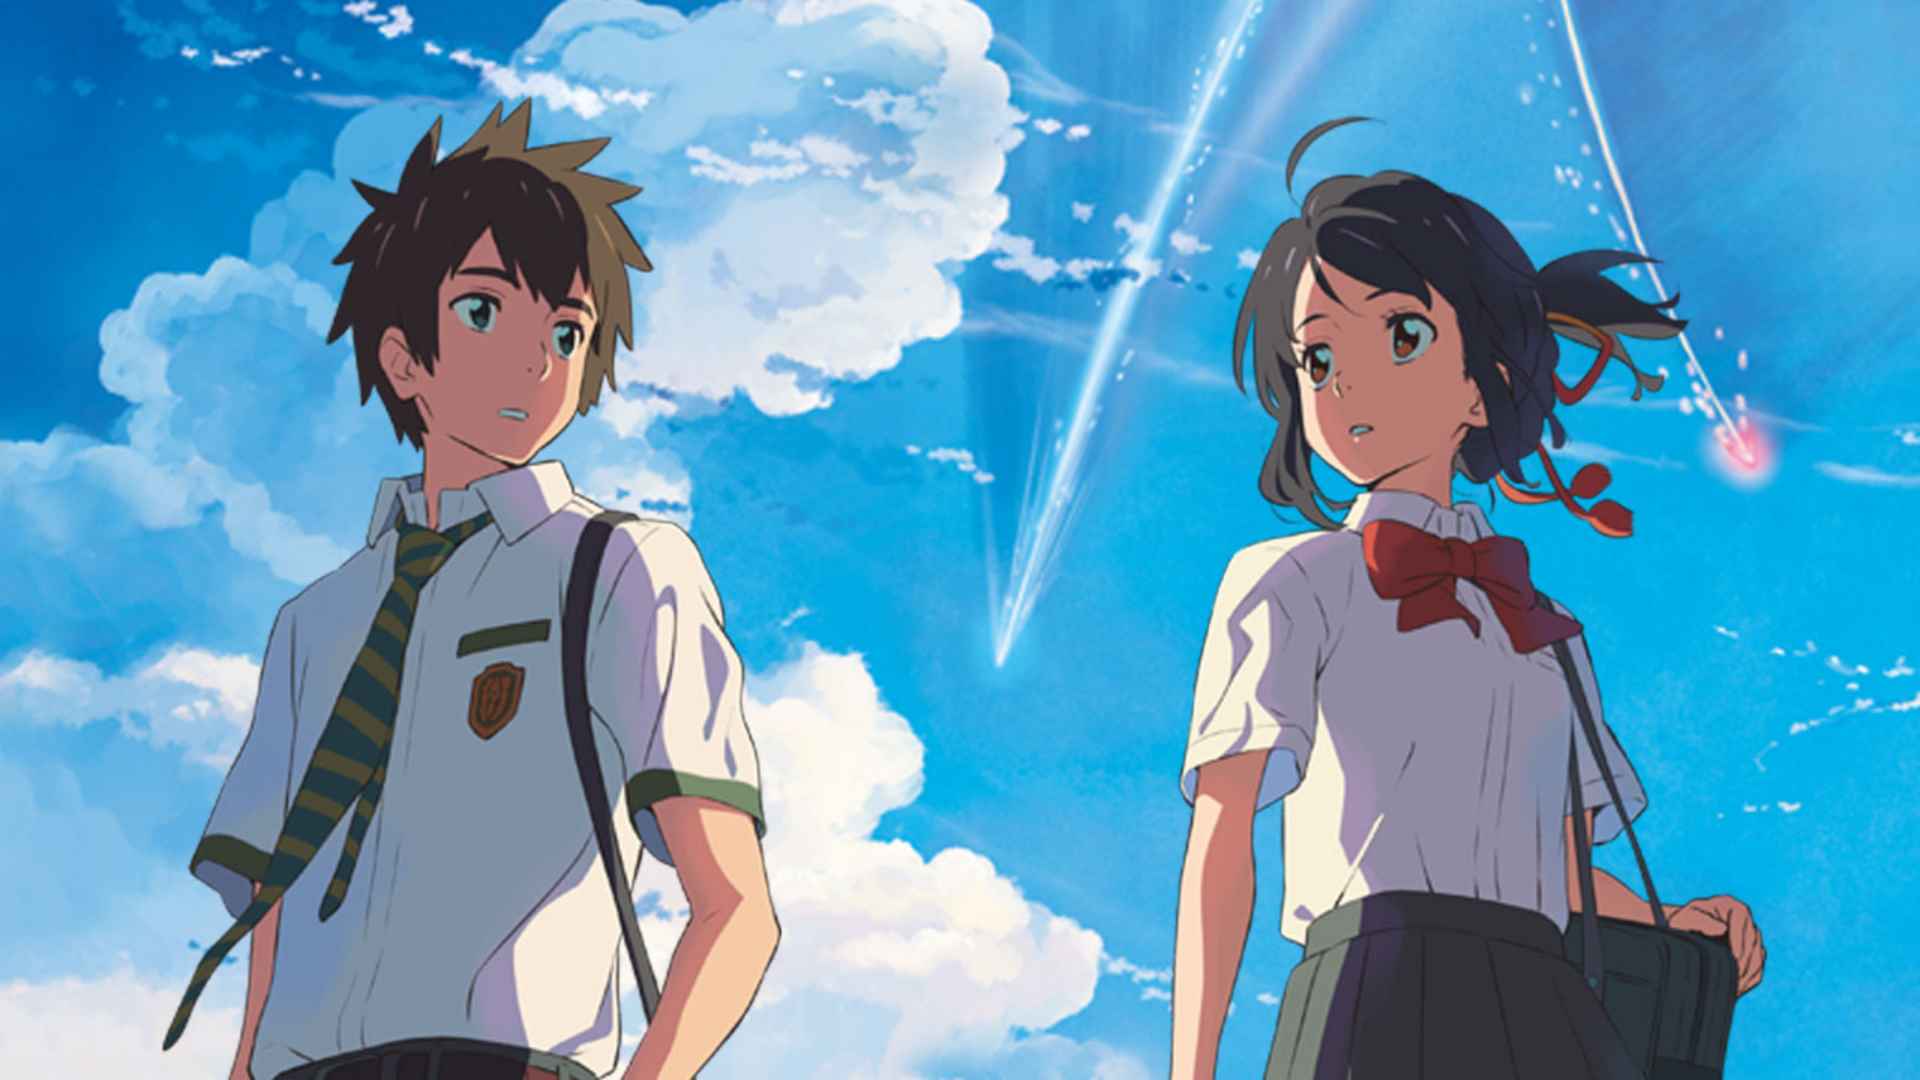 Your Name Kimi No Na Wa All Genres Anime Movies To Watch Online For Free